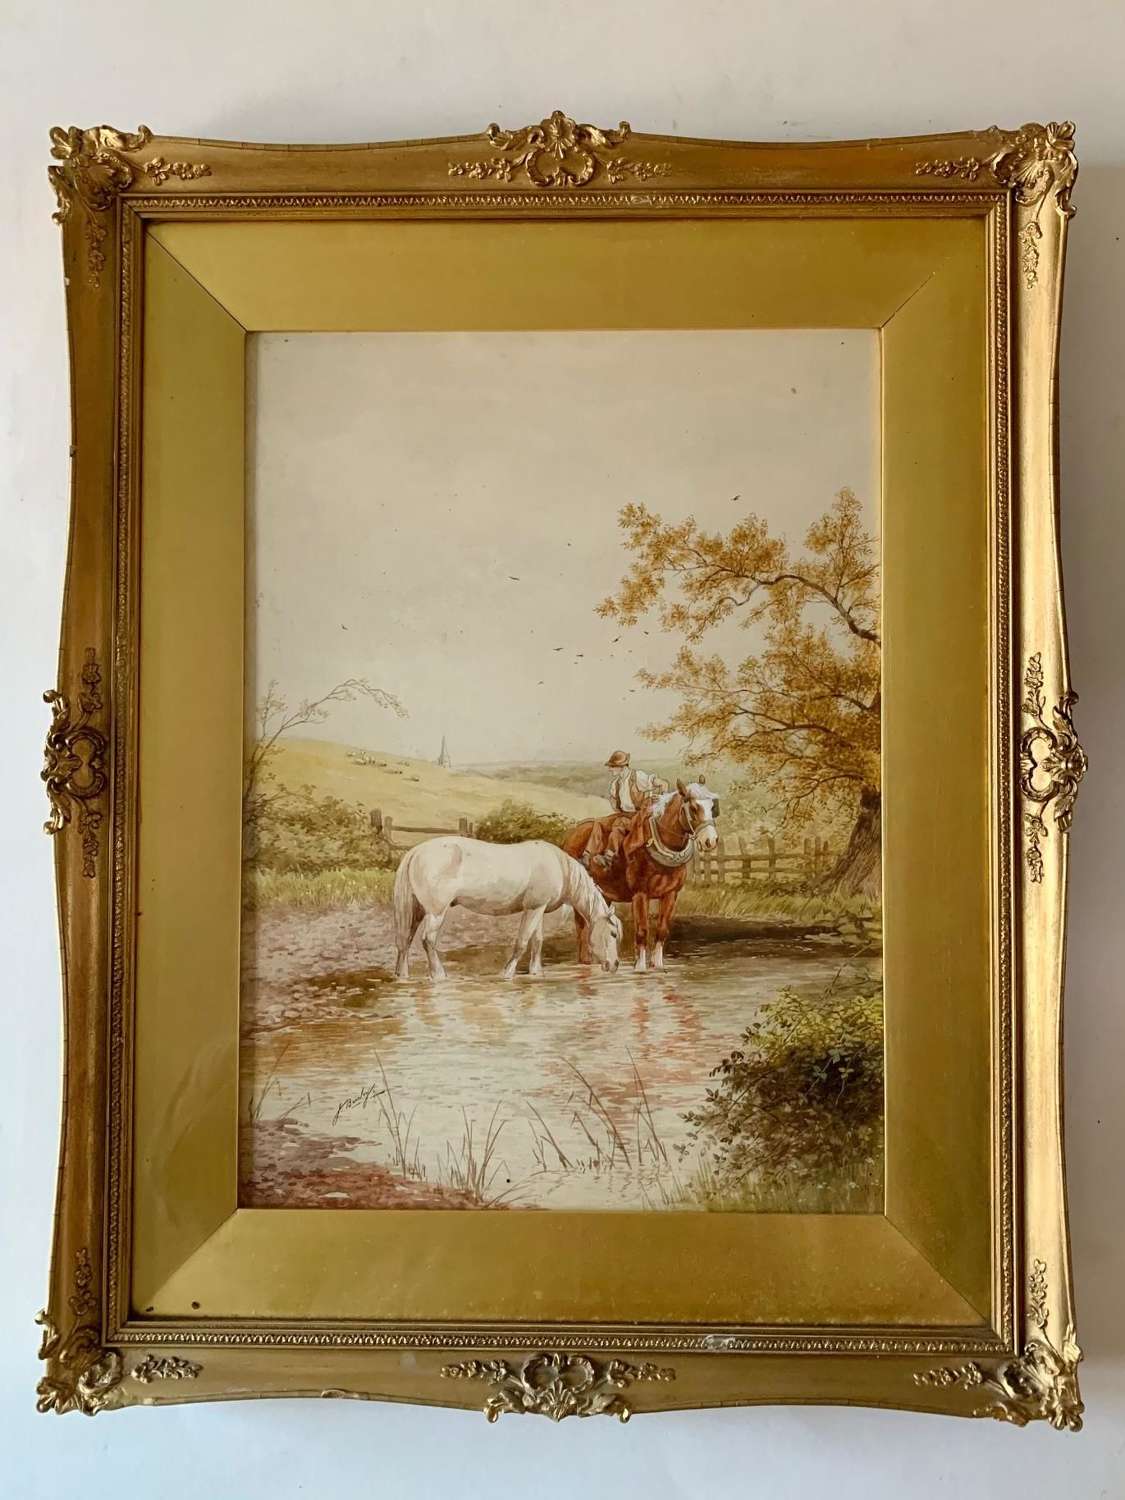 J Barclay 19thc Watercolour, Figure and Horses in Stream